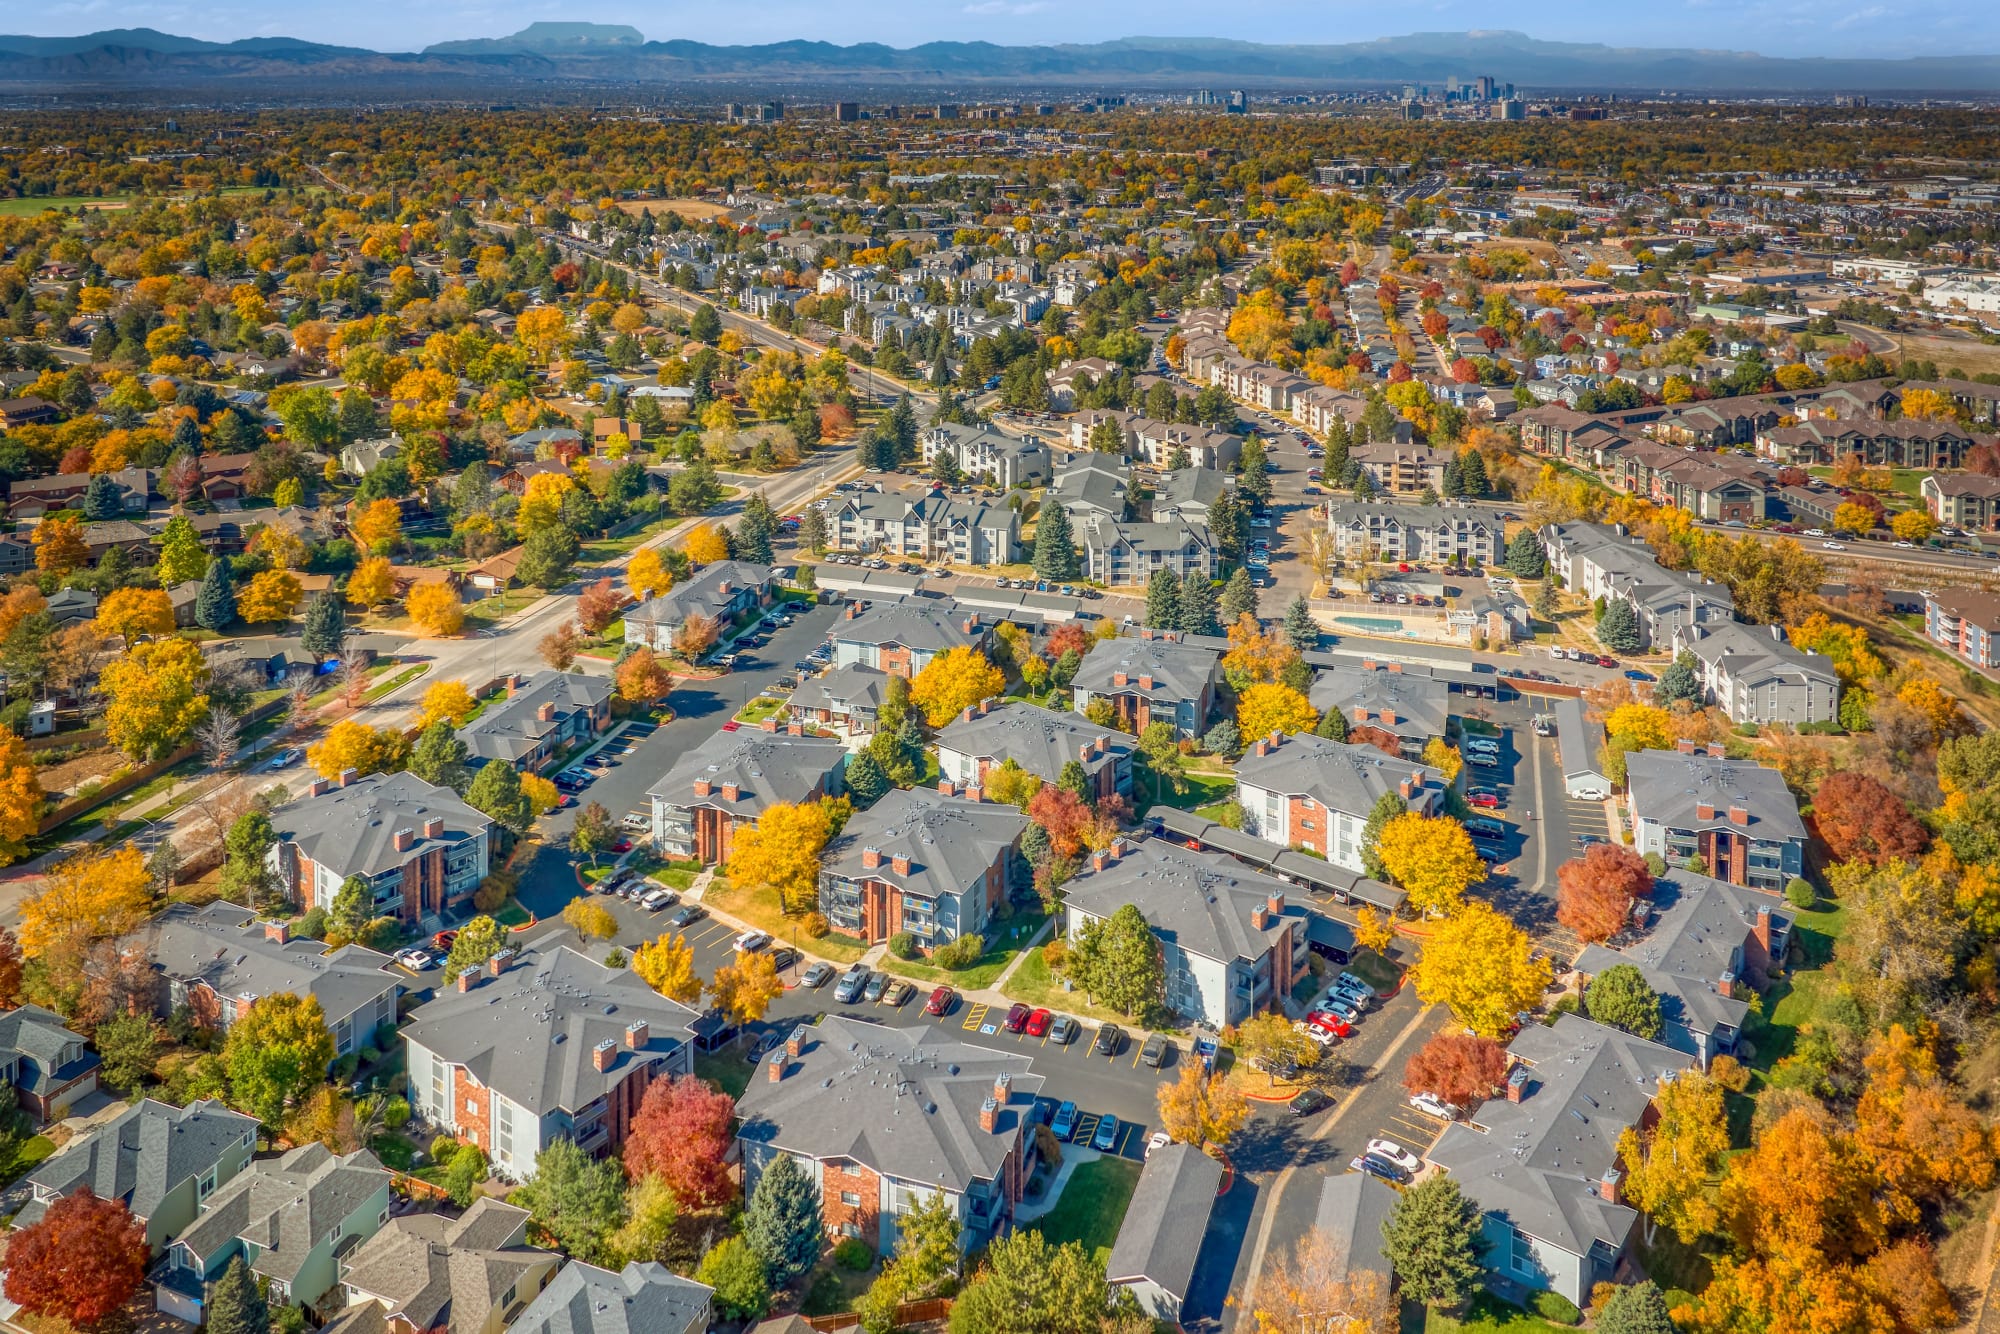 An aerial view of the property and surrounding areas at Arapahoe Club Apartments in Denver, Colorado